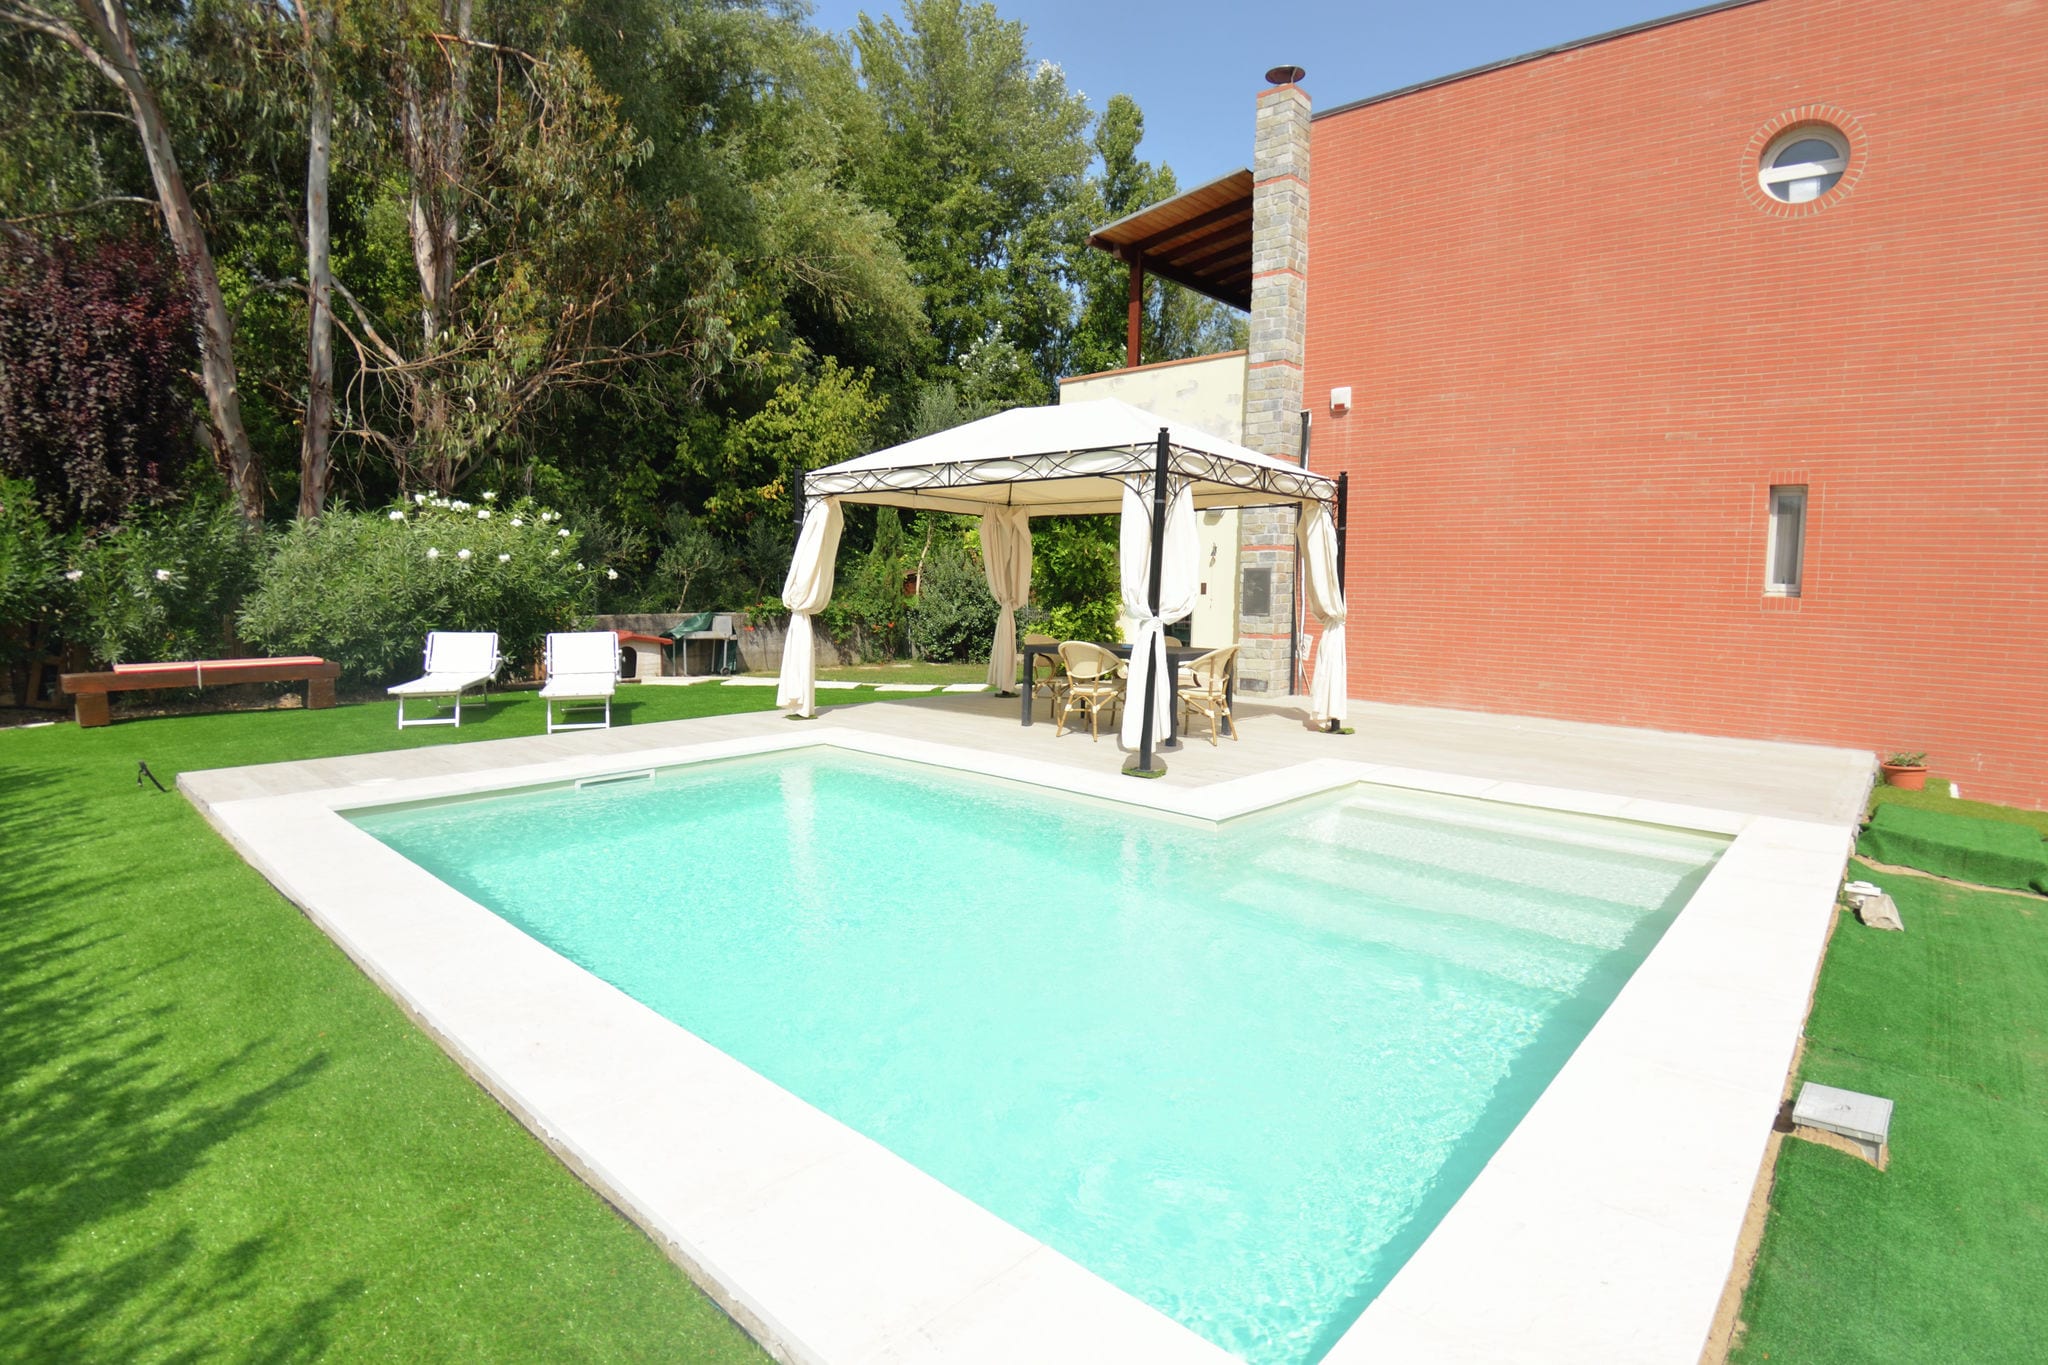 Modern villa with private pool and fenced garden 2.5 km from Lucca